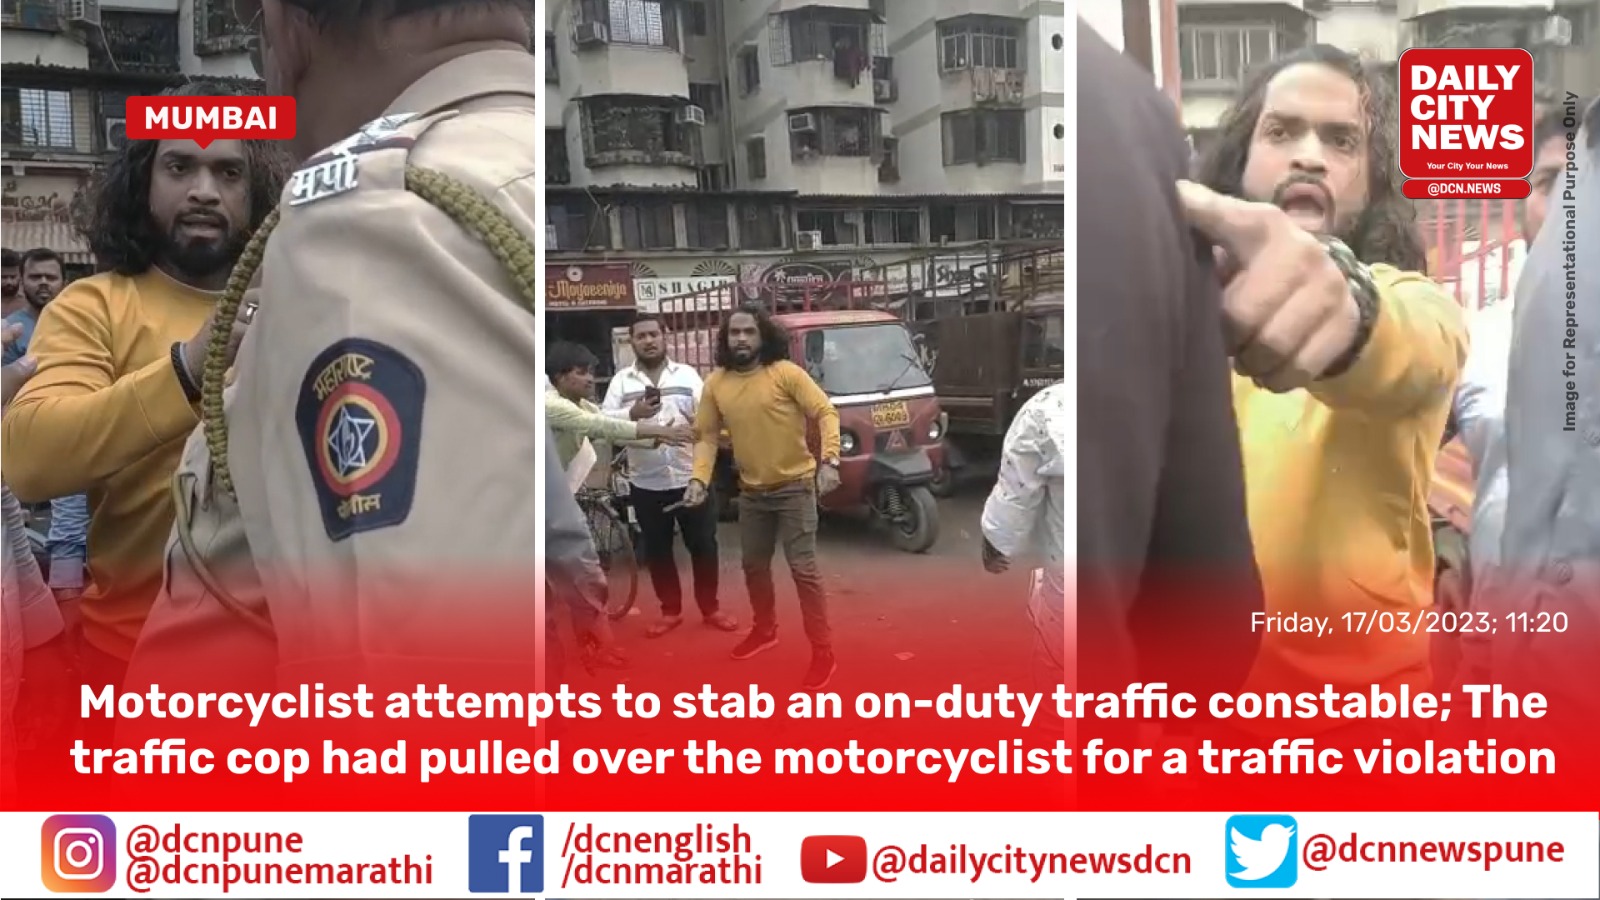 Motorcyclist attempts to stab an on-duty traffic constable; The traffic cop had pulled over the motorcyclist for a traffic violation